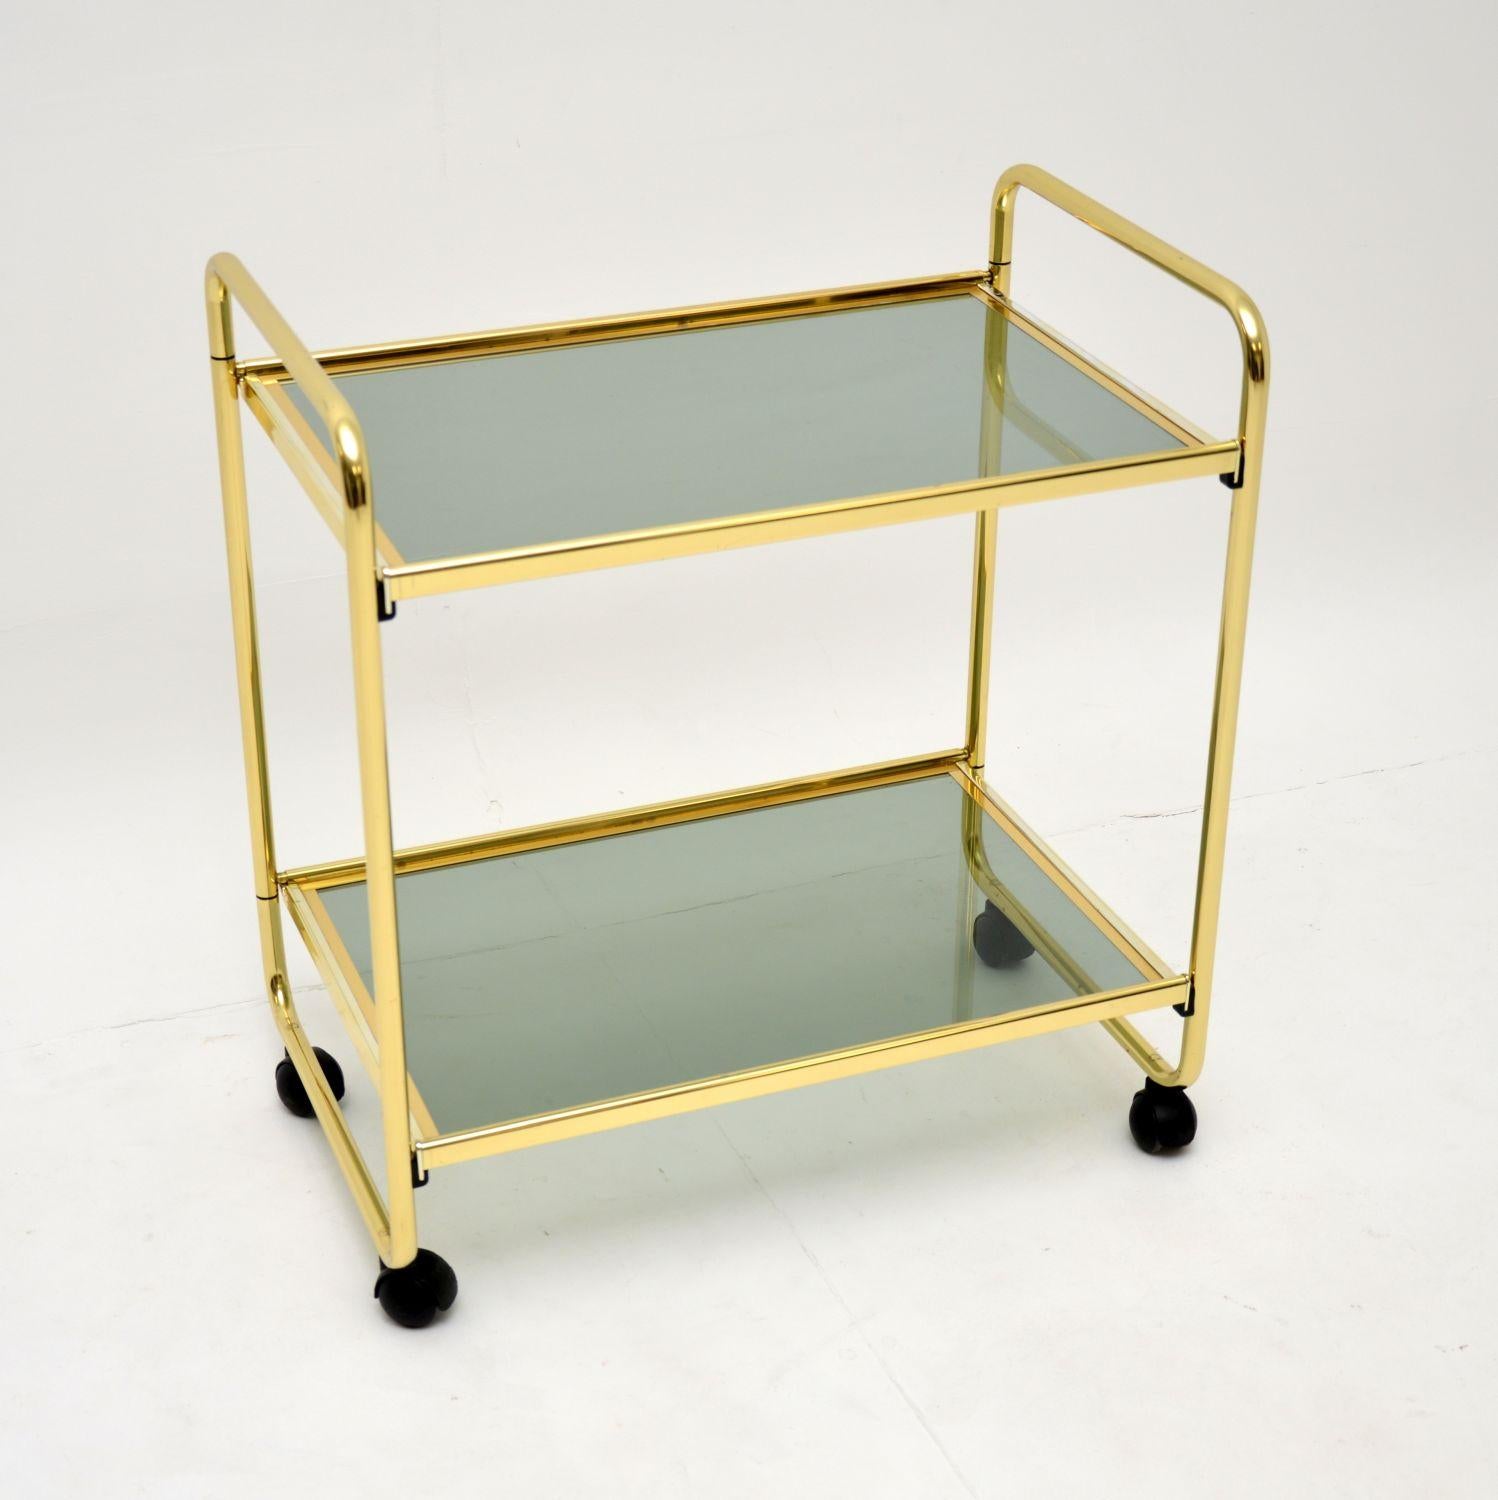 A wonderful vintage Italian drinks trolley in brass, with a very clever folding design. This was made in Italy by MB Italia, it dates from around the 1970-1980’s.

The quality is fantastic, and this has an unusual patented method of folding